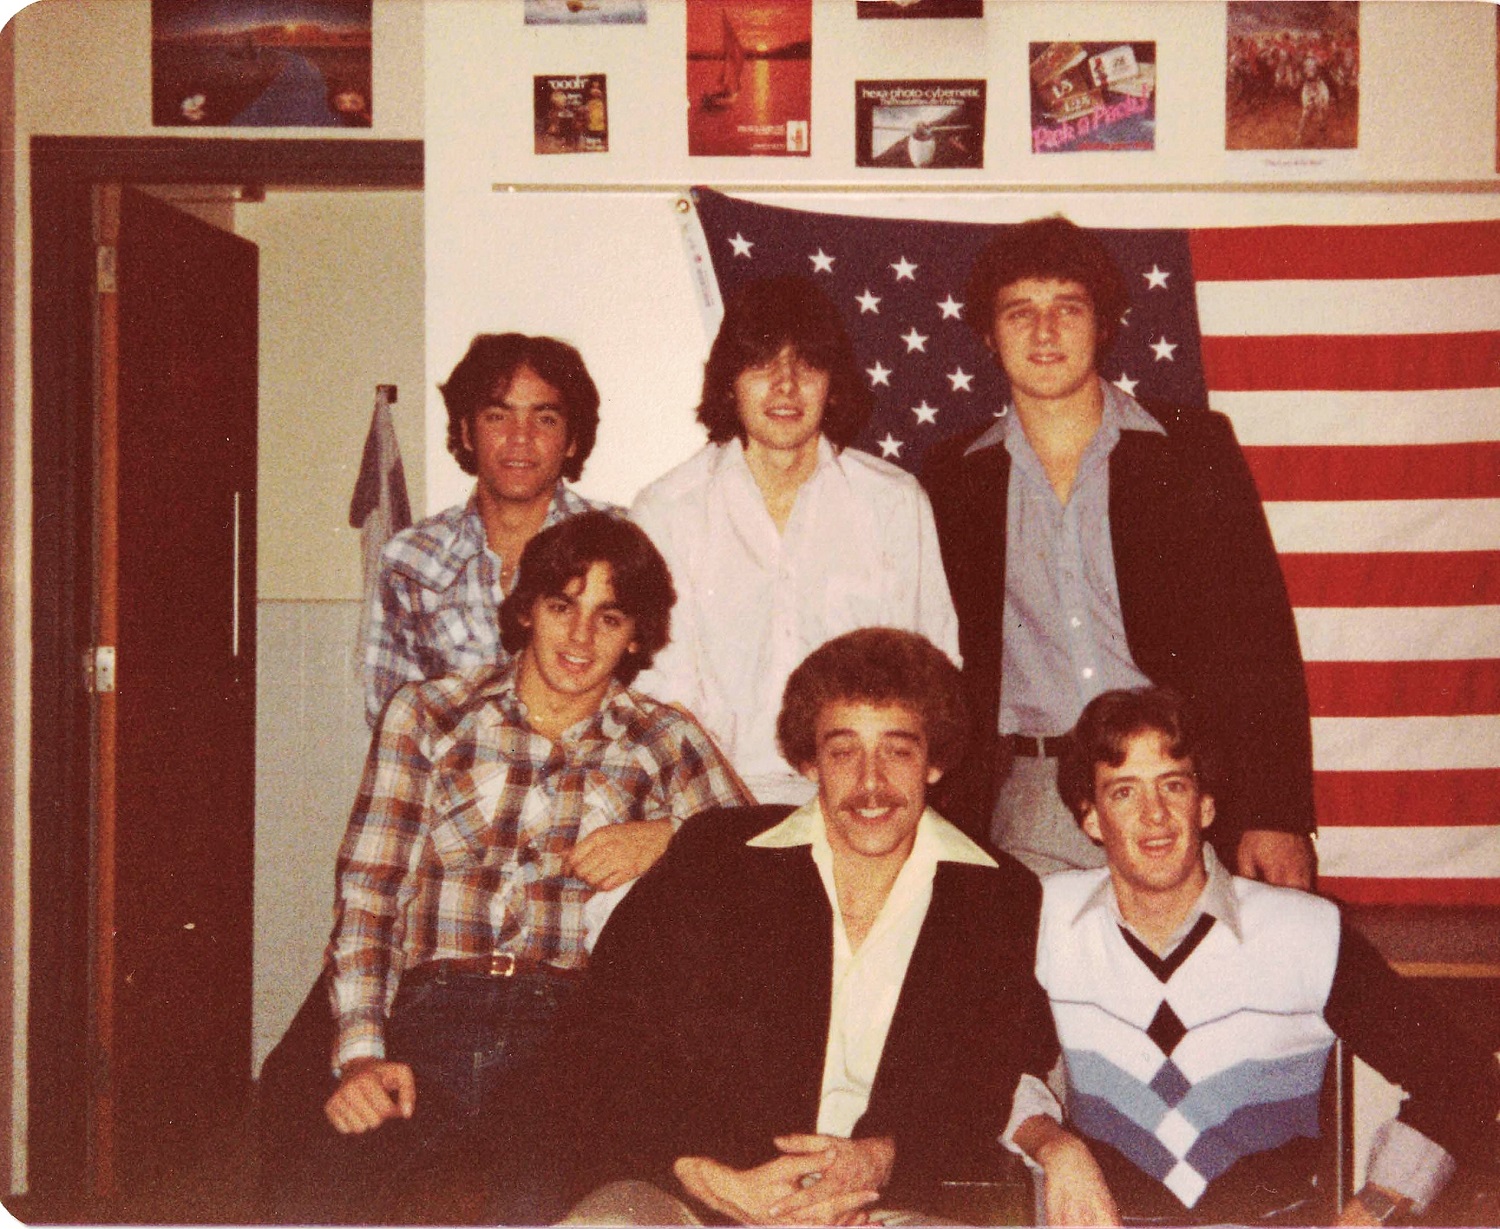 Fall 1980  Perry Hall Room 201 C<br />
we planned a floor dinner, and we all wanted to get dressed up to make it special